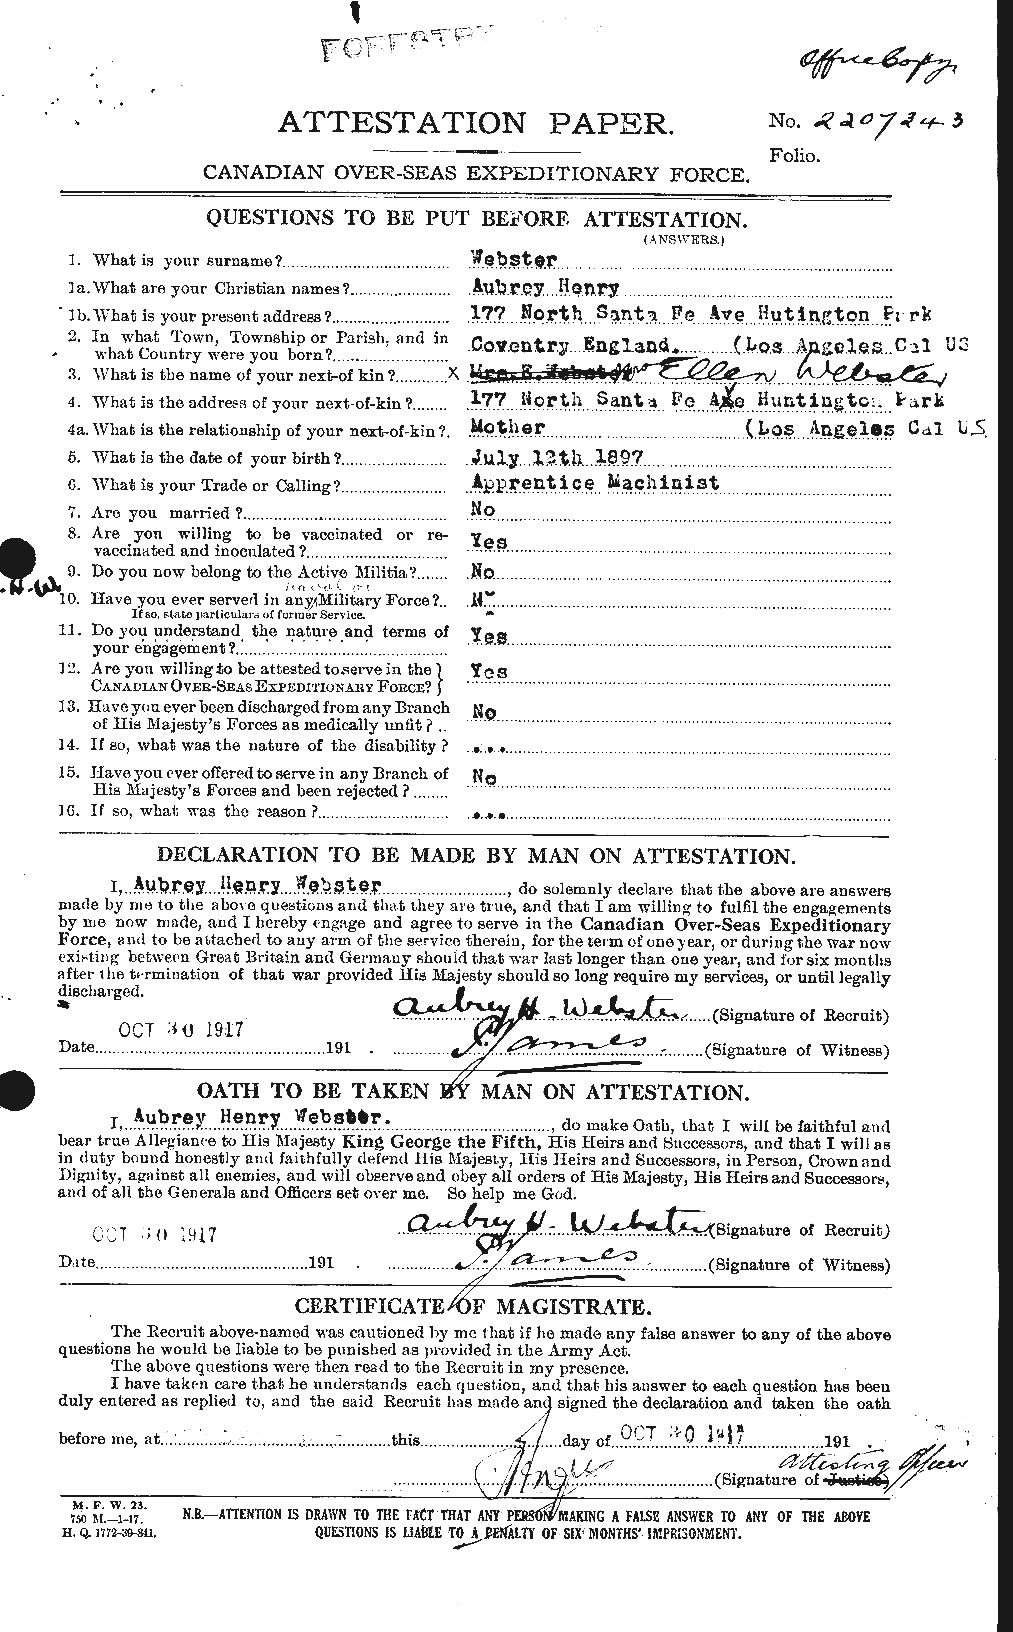 Personnel Records of the First World War - CEF 670273a